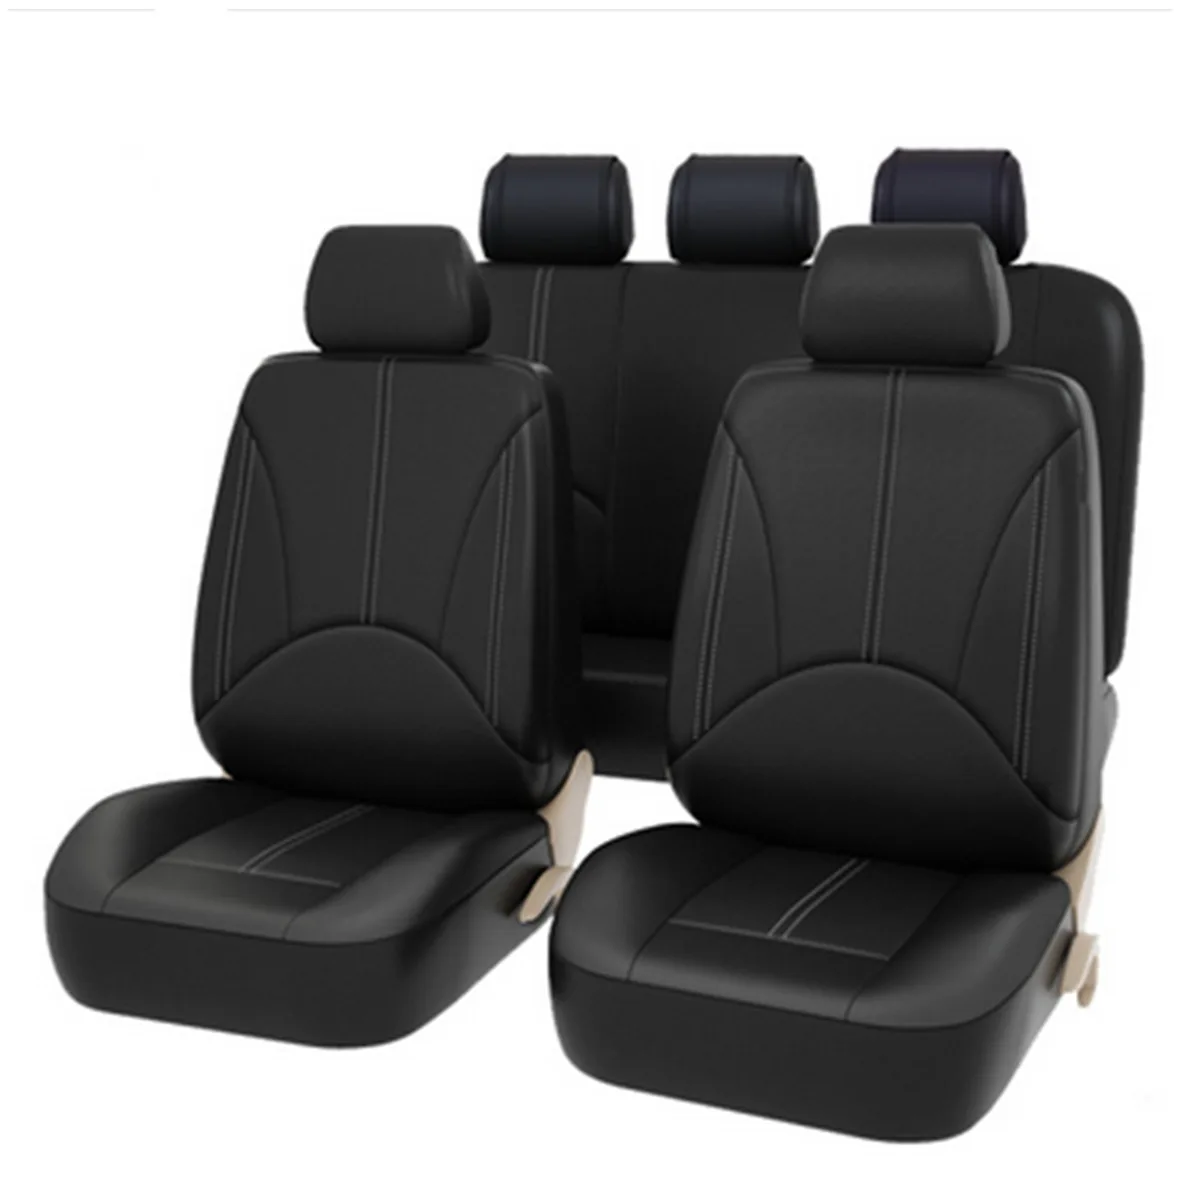 Top Selling Universal  Luxury  Leather Car Seat Covers Full Set Seat Cover For honda/toyota